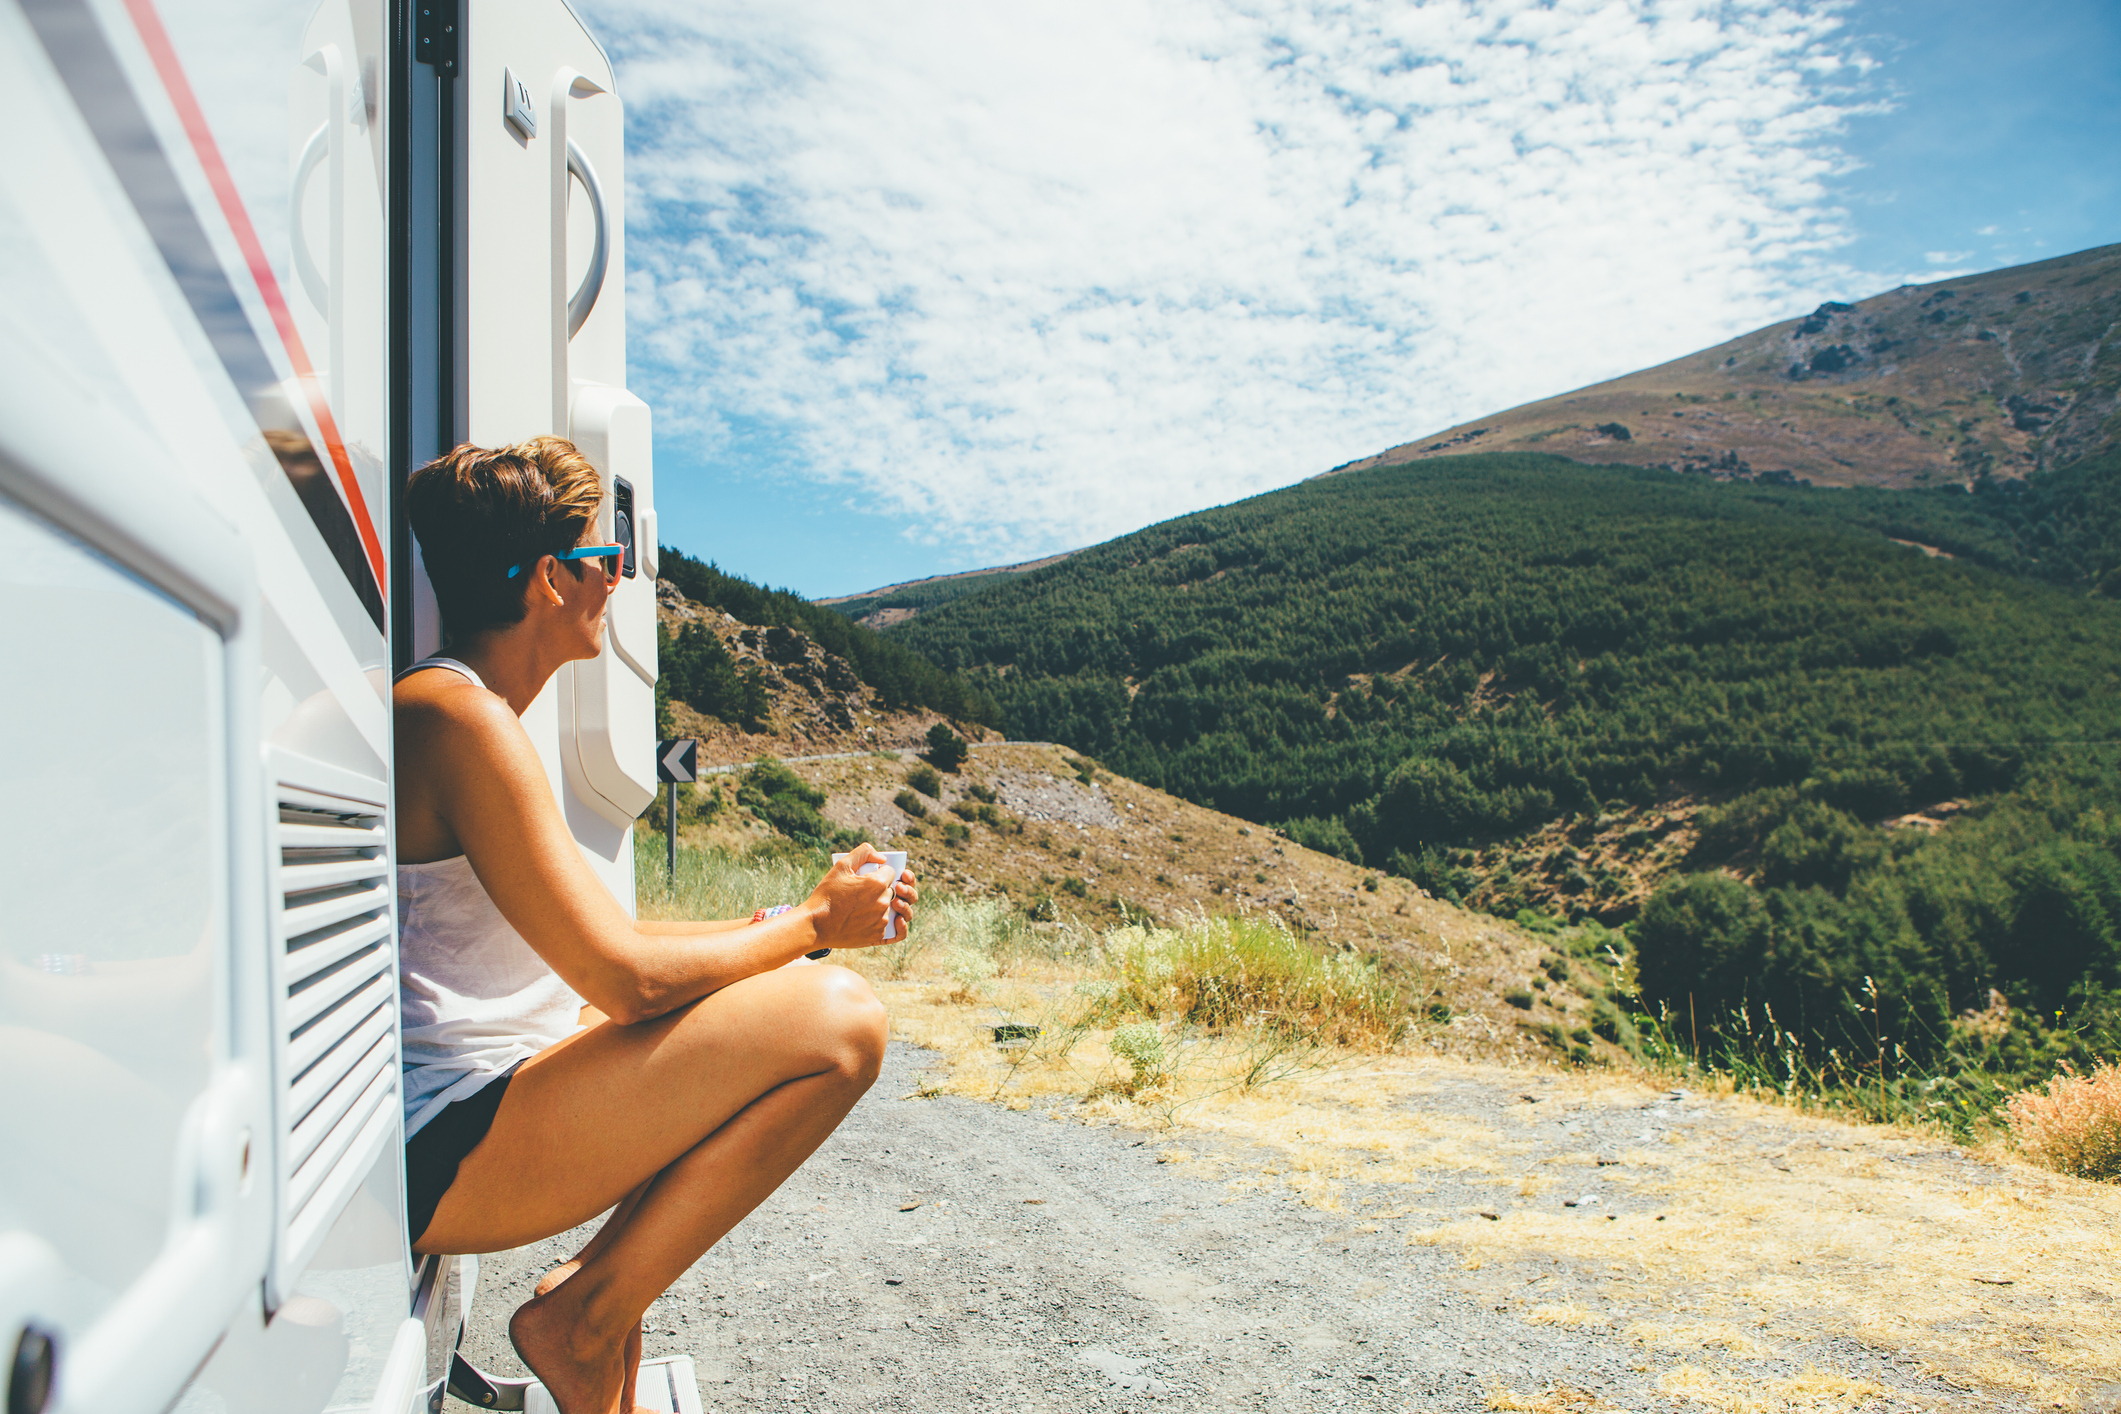 Side view of a young woman is sitting on a caravan step and holding a cup on a holiday adventure trip stop. Copy space area available